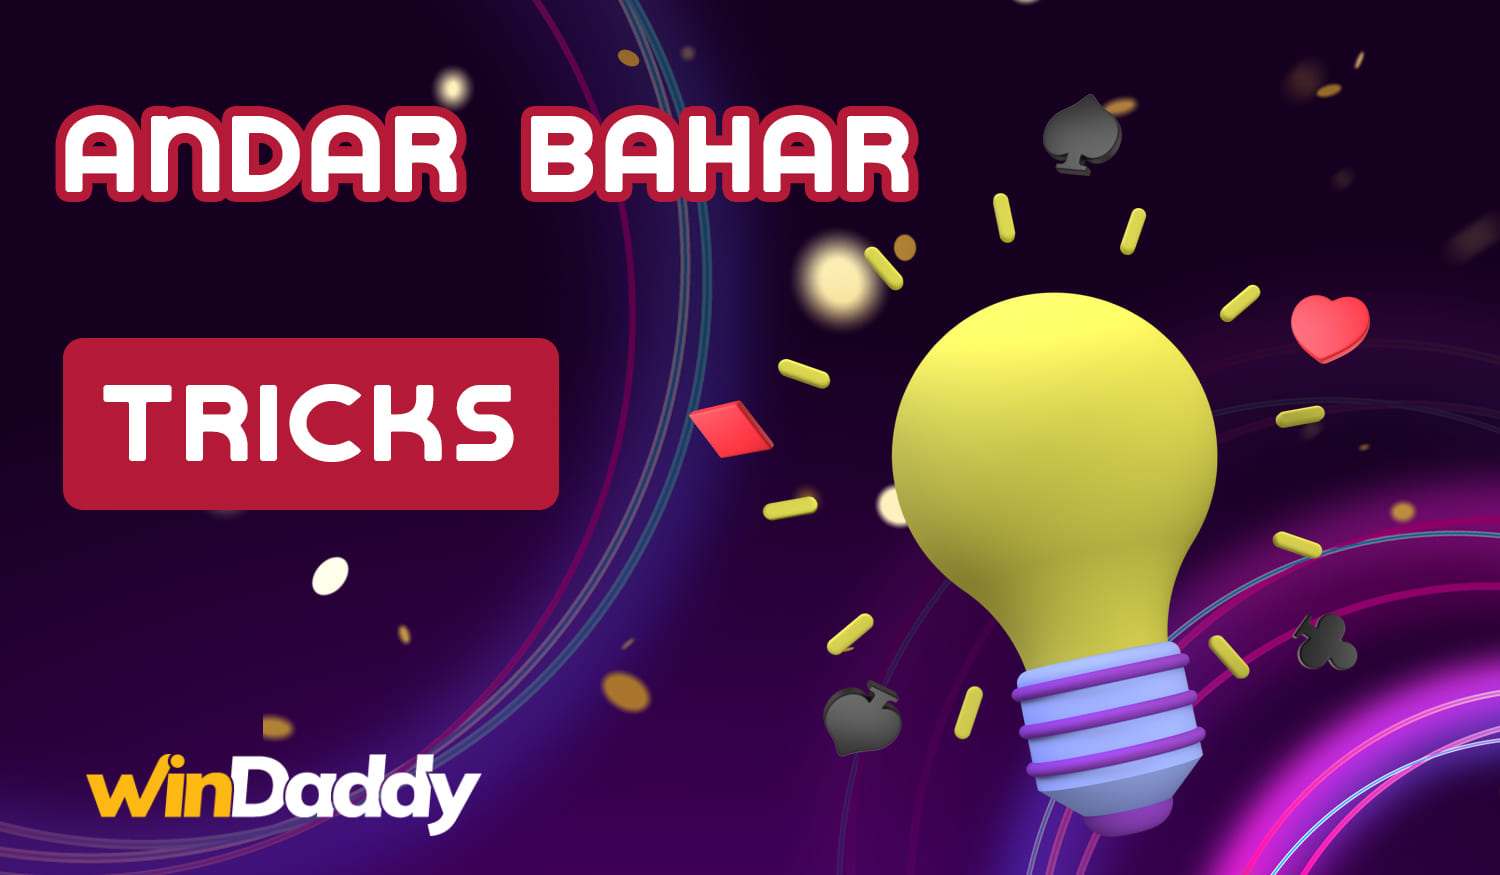 Description of strategies by which Indian users can successfully play Andar Bahar on Windaddy